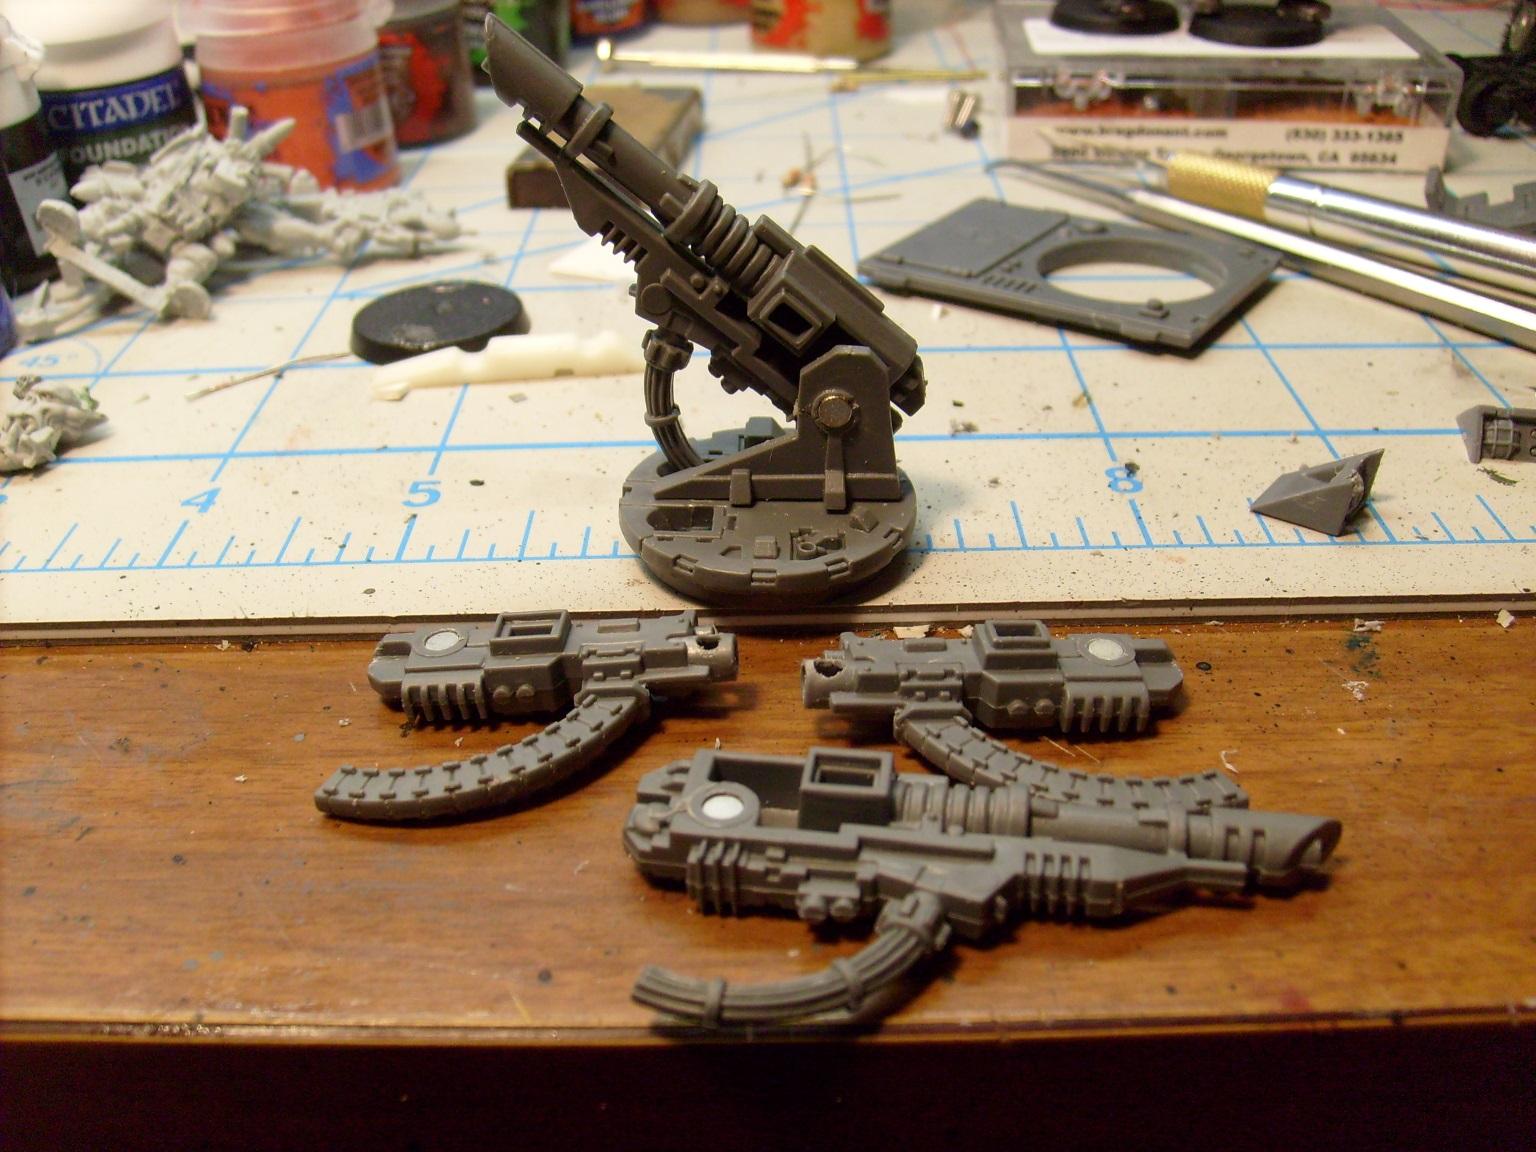 Magnetizing my weapons array